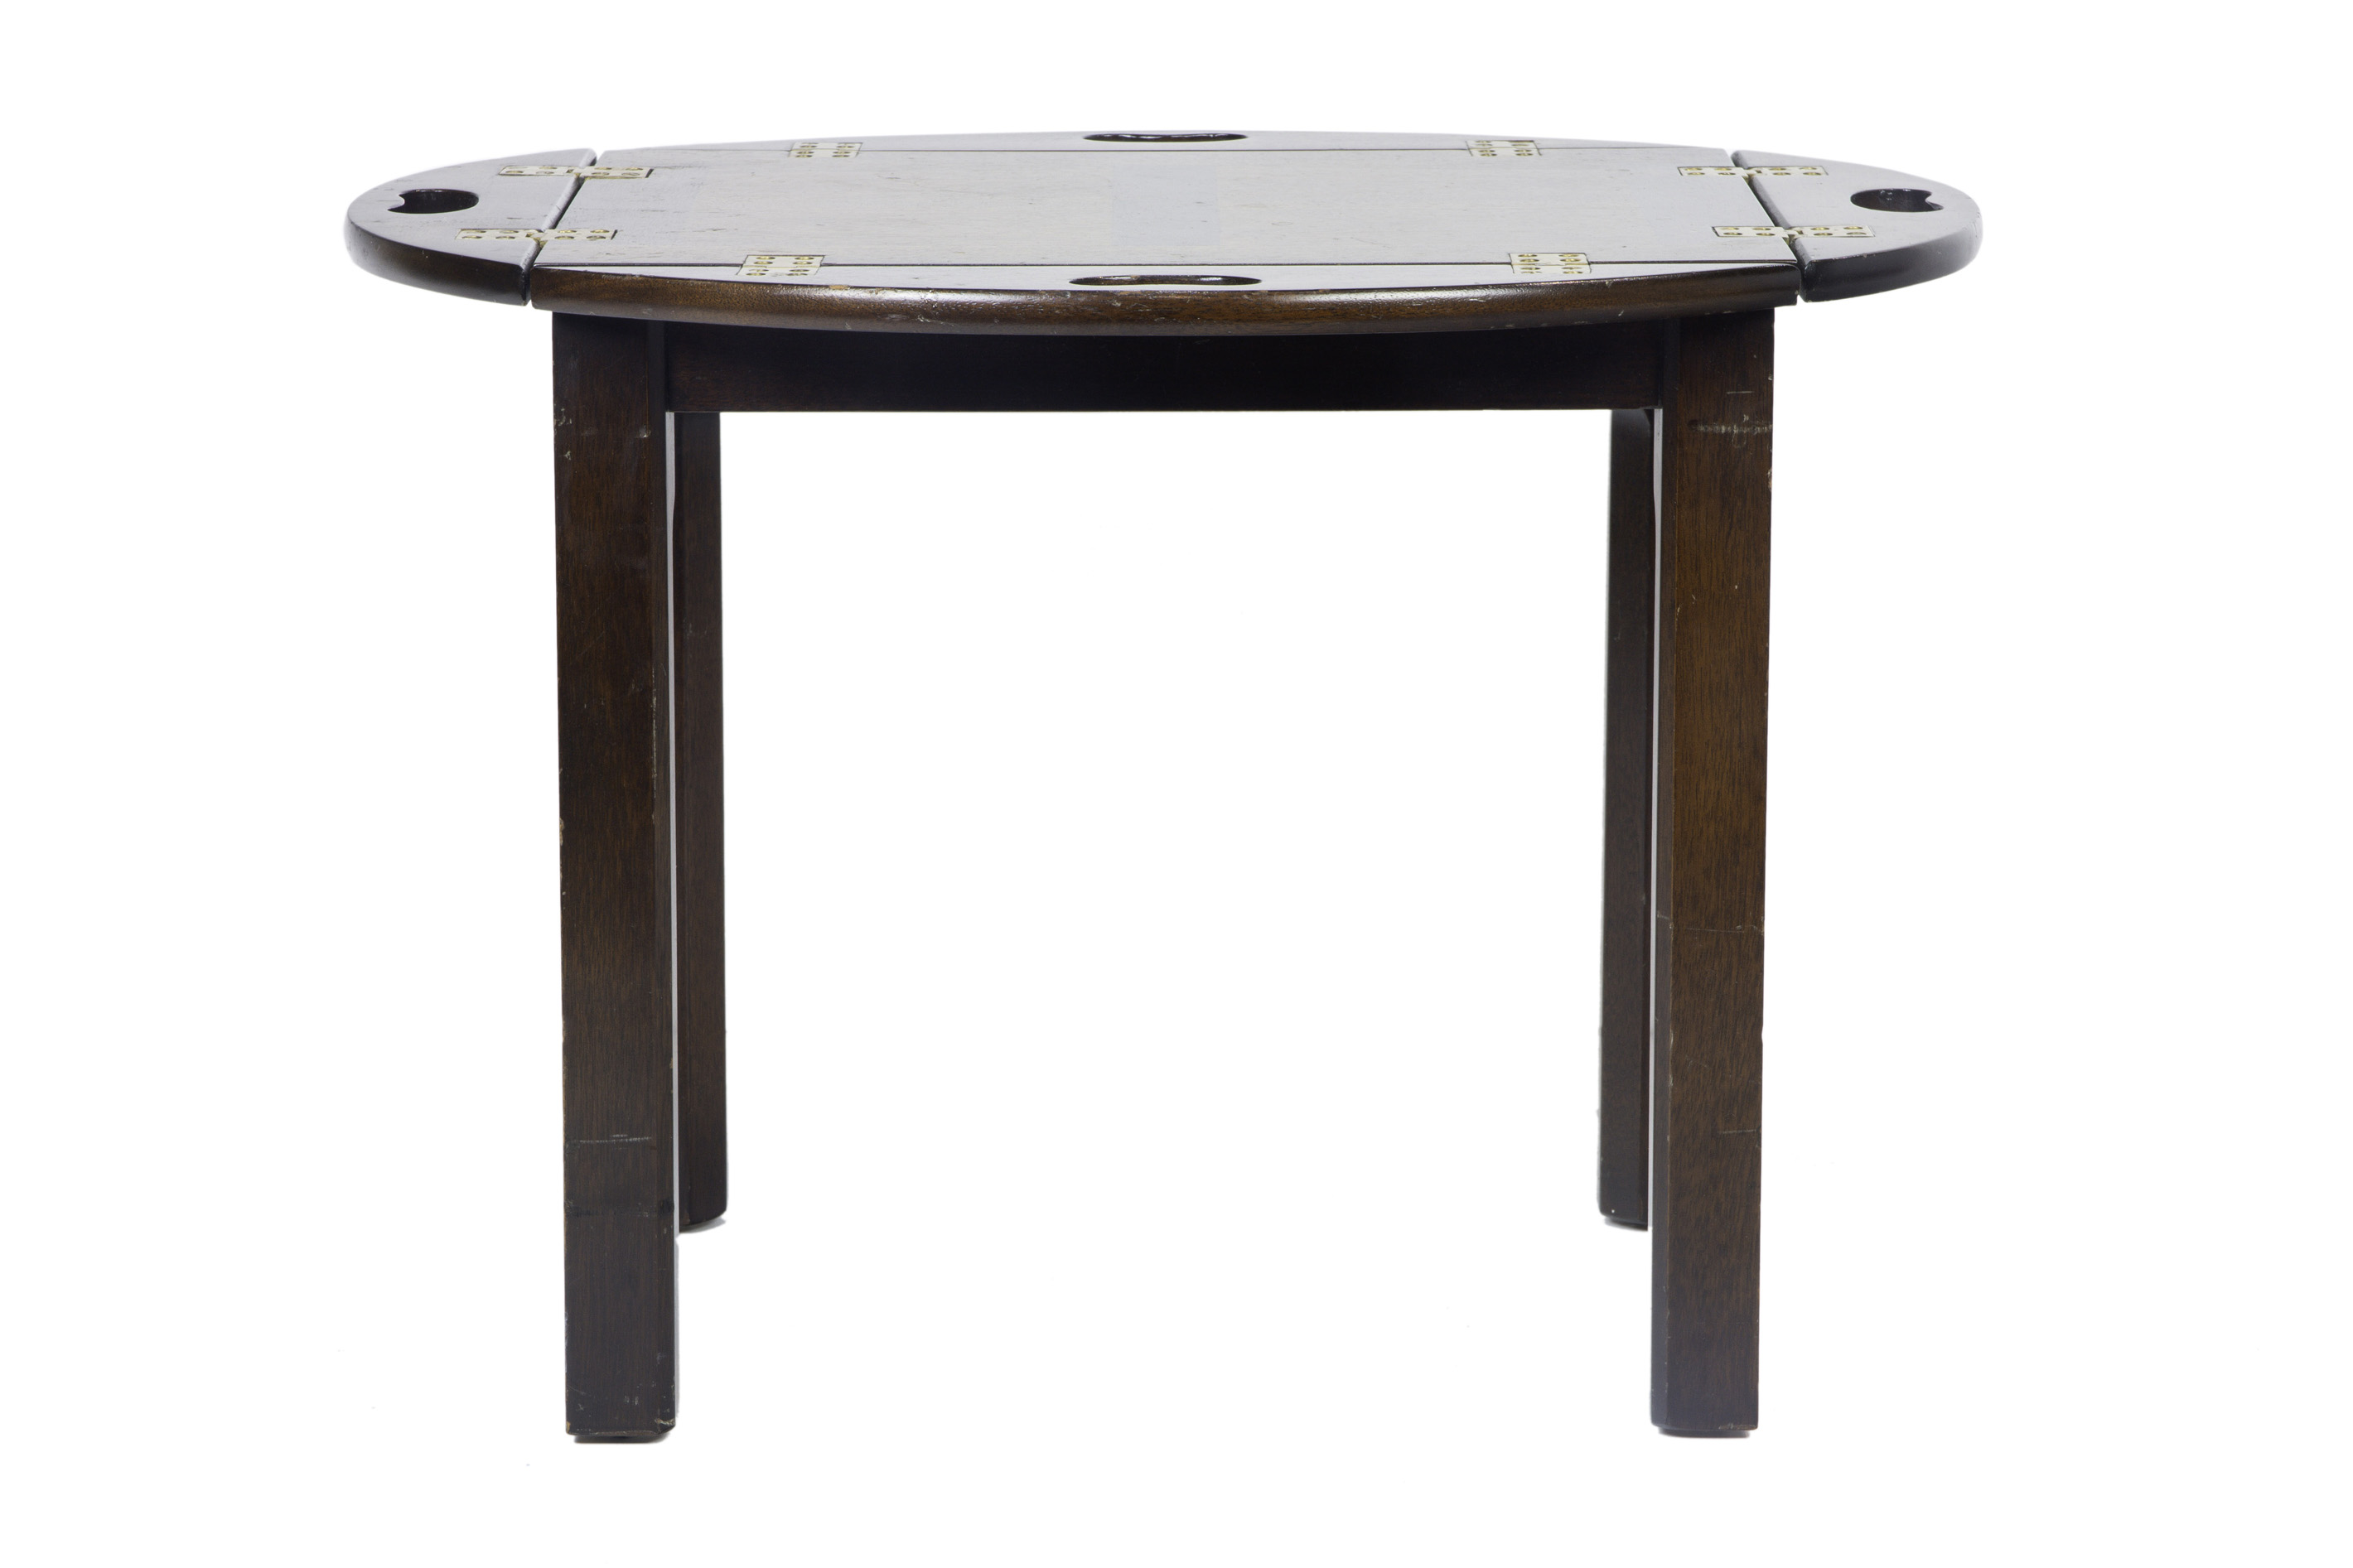 A GEORGIAN STYLE OCCASIONAL TABLE